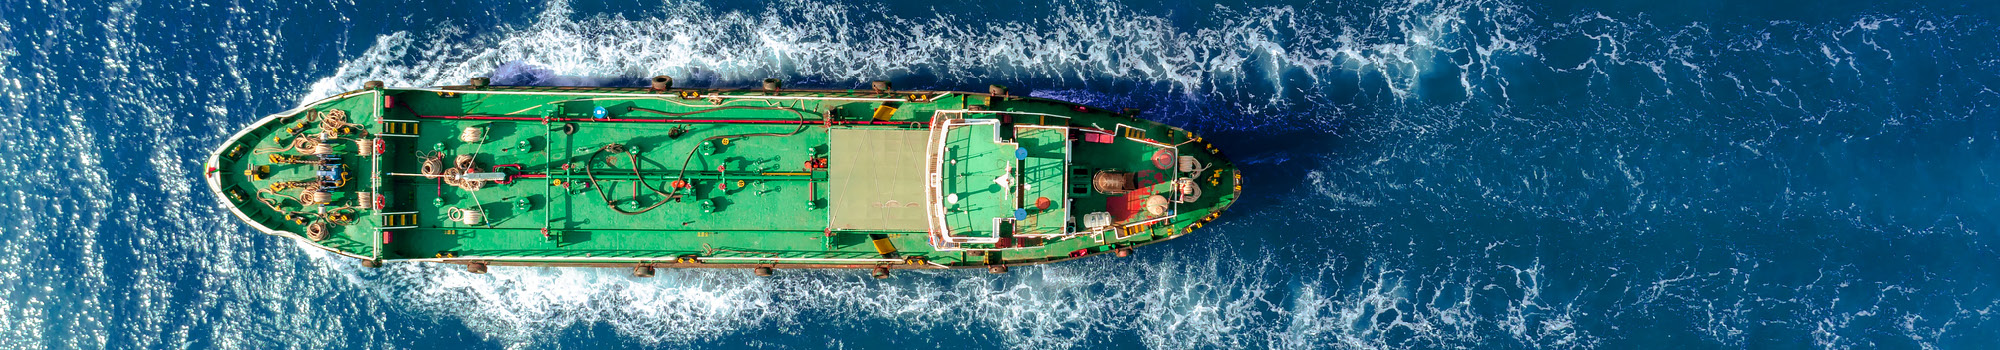 Image of a ship at sea, from above